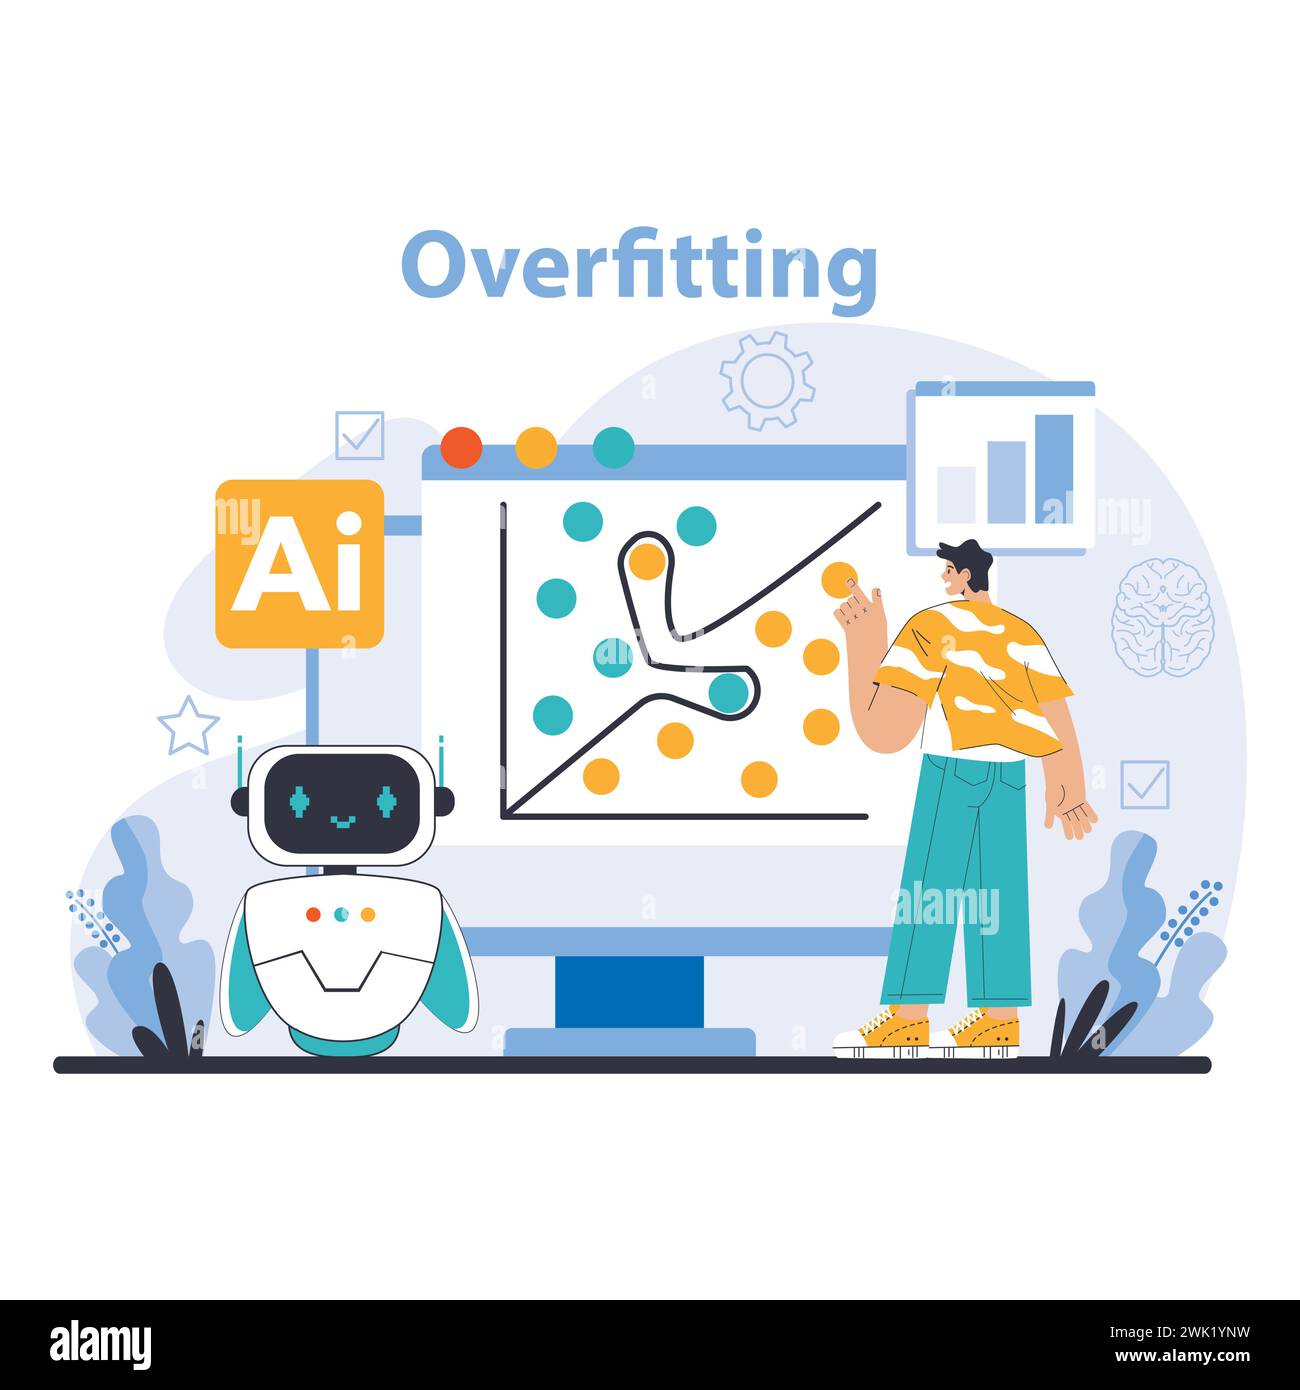 AI Model concept. Educational visual on overfitting in data science, featuring AI and machine learning algorithms. Expertise in action. Flat vector illustration. Stock Vector